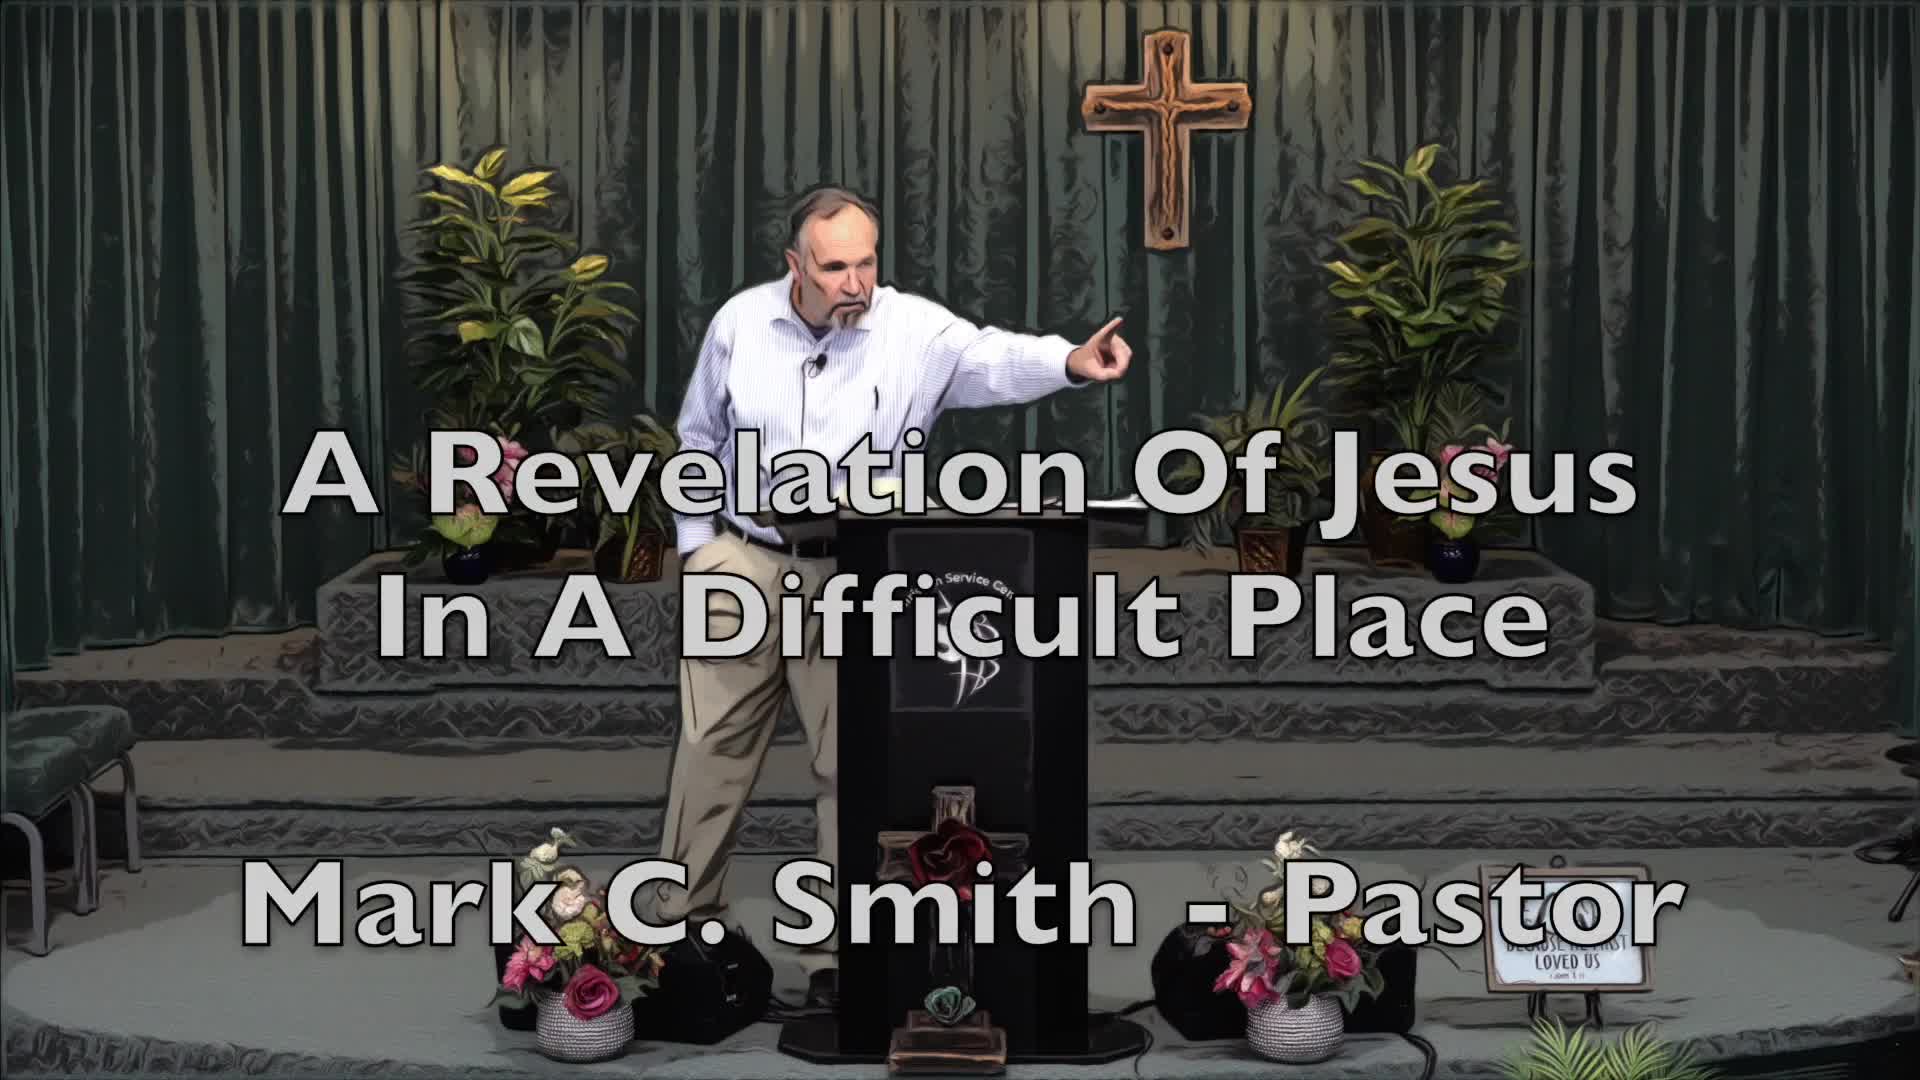 A Revelation of Jesus in a Difficult Place